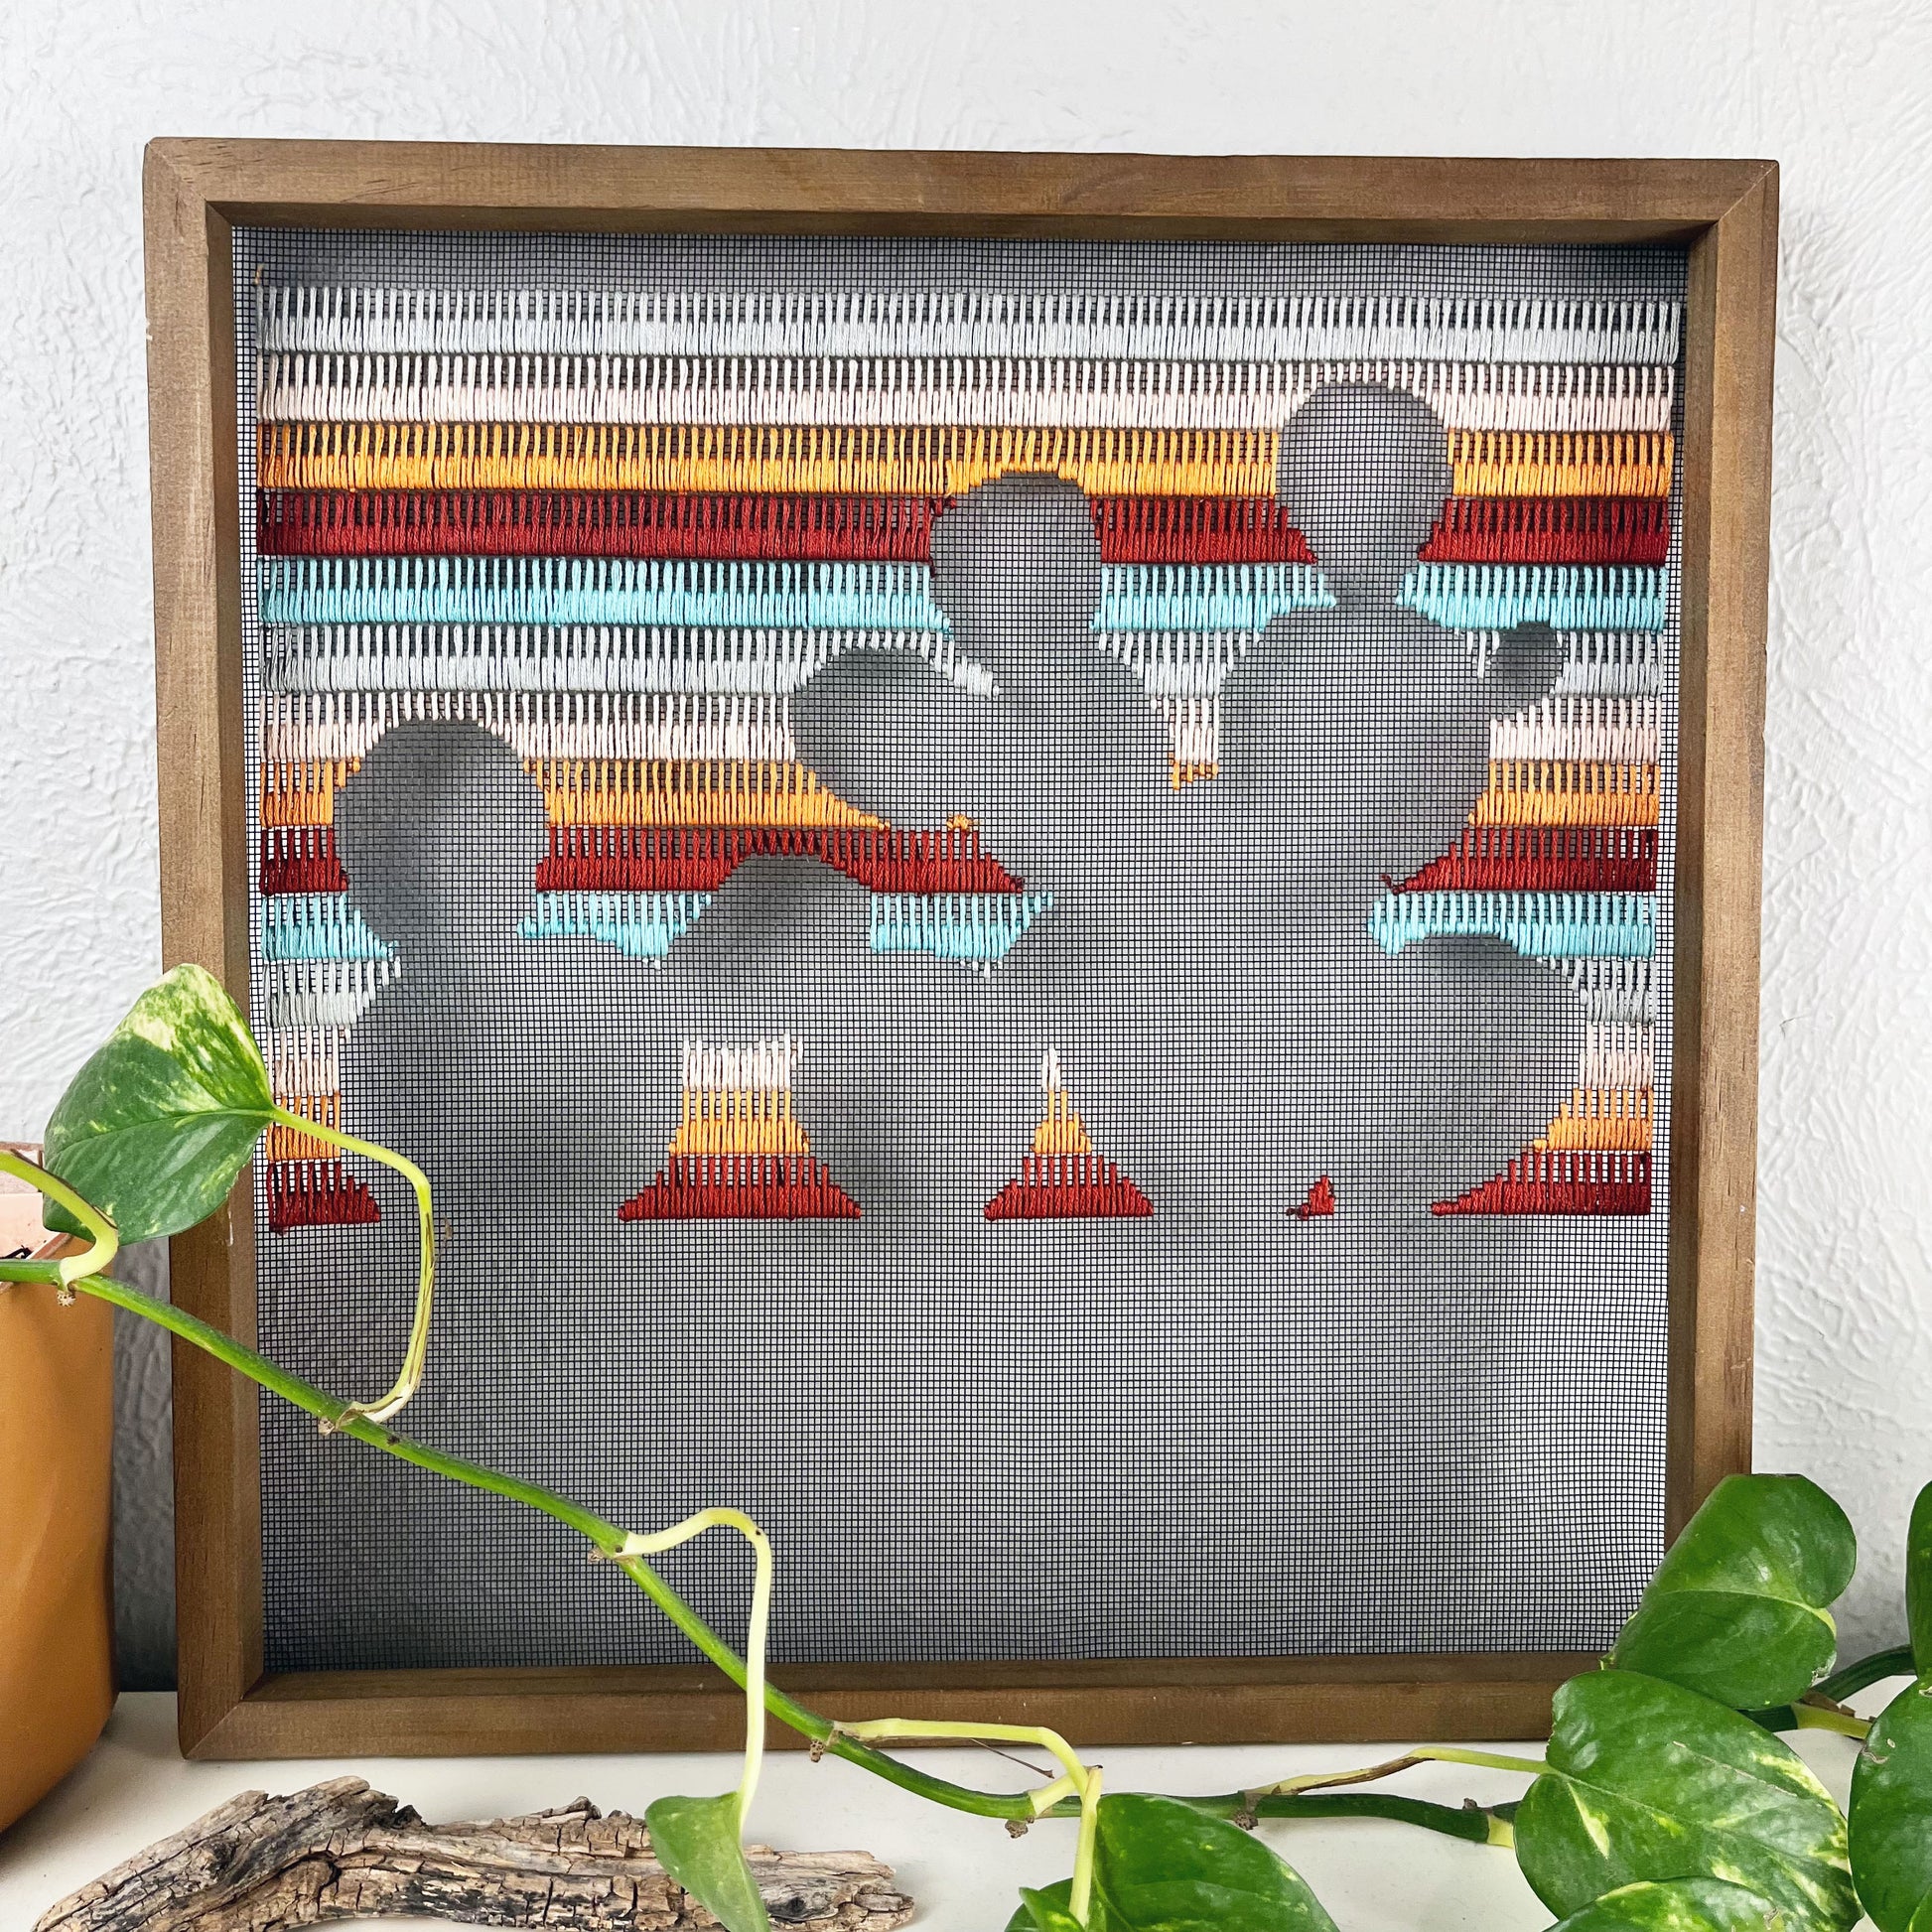 a piece of window screen hand stitched with rows of maroon orange peach grey and aqua blue stitches with an image in negative space of a prickly pear cactus, in a square wood frame, on a white counter, with a pothos vine around it